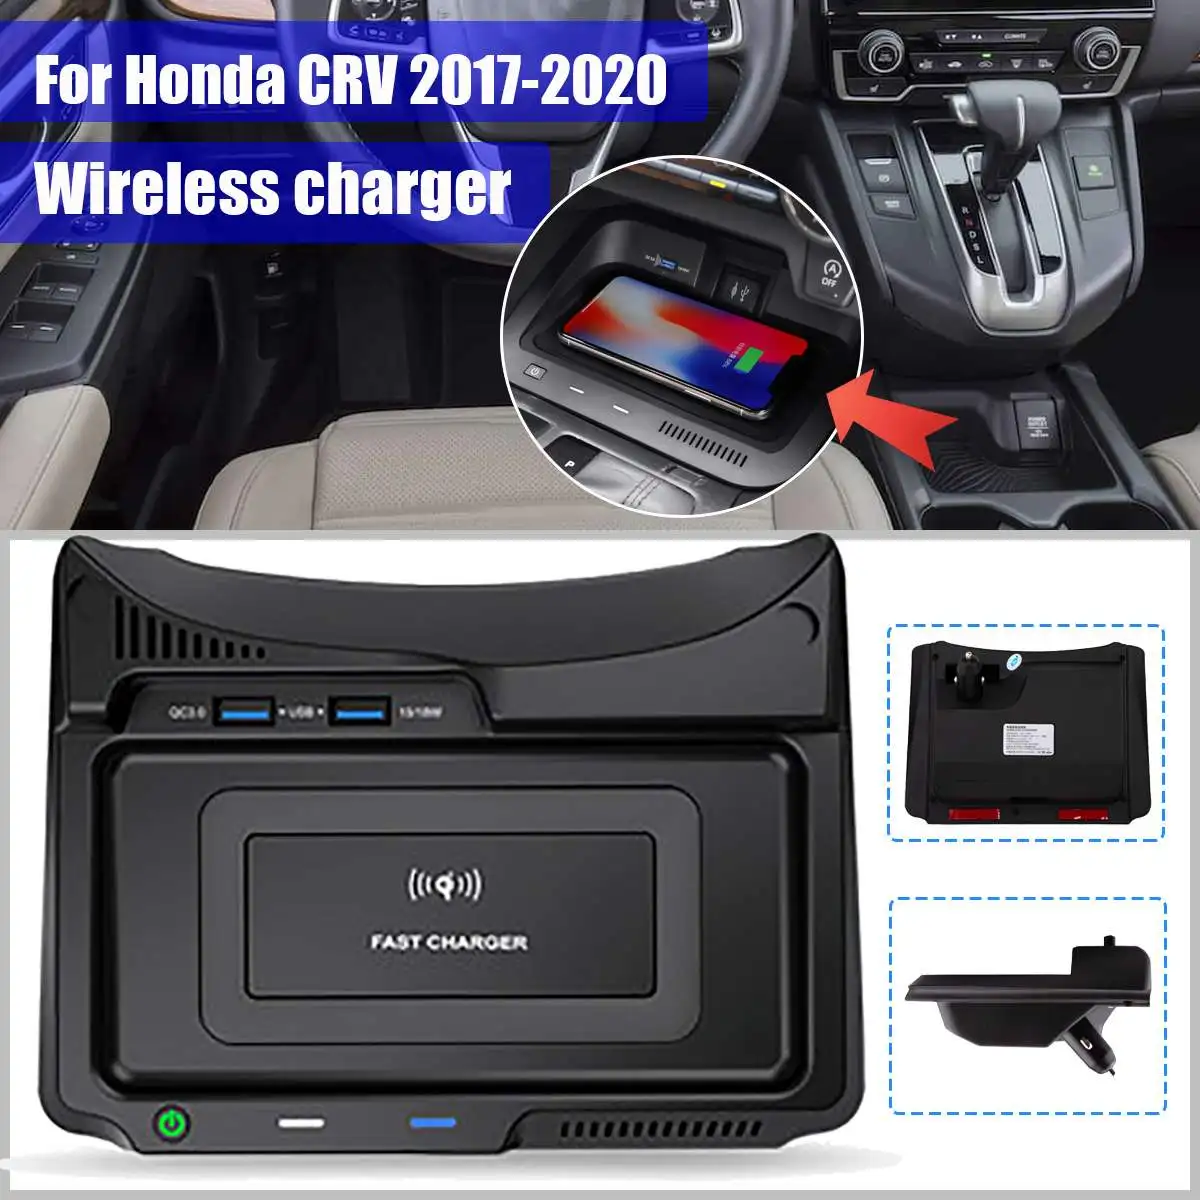 Wireless charger For Honda CRV 2017 2018 2019 2020 Accessories Car Mobile Phone Fast Charging Decoration | Автомобили и мотоциклы